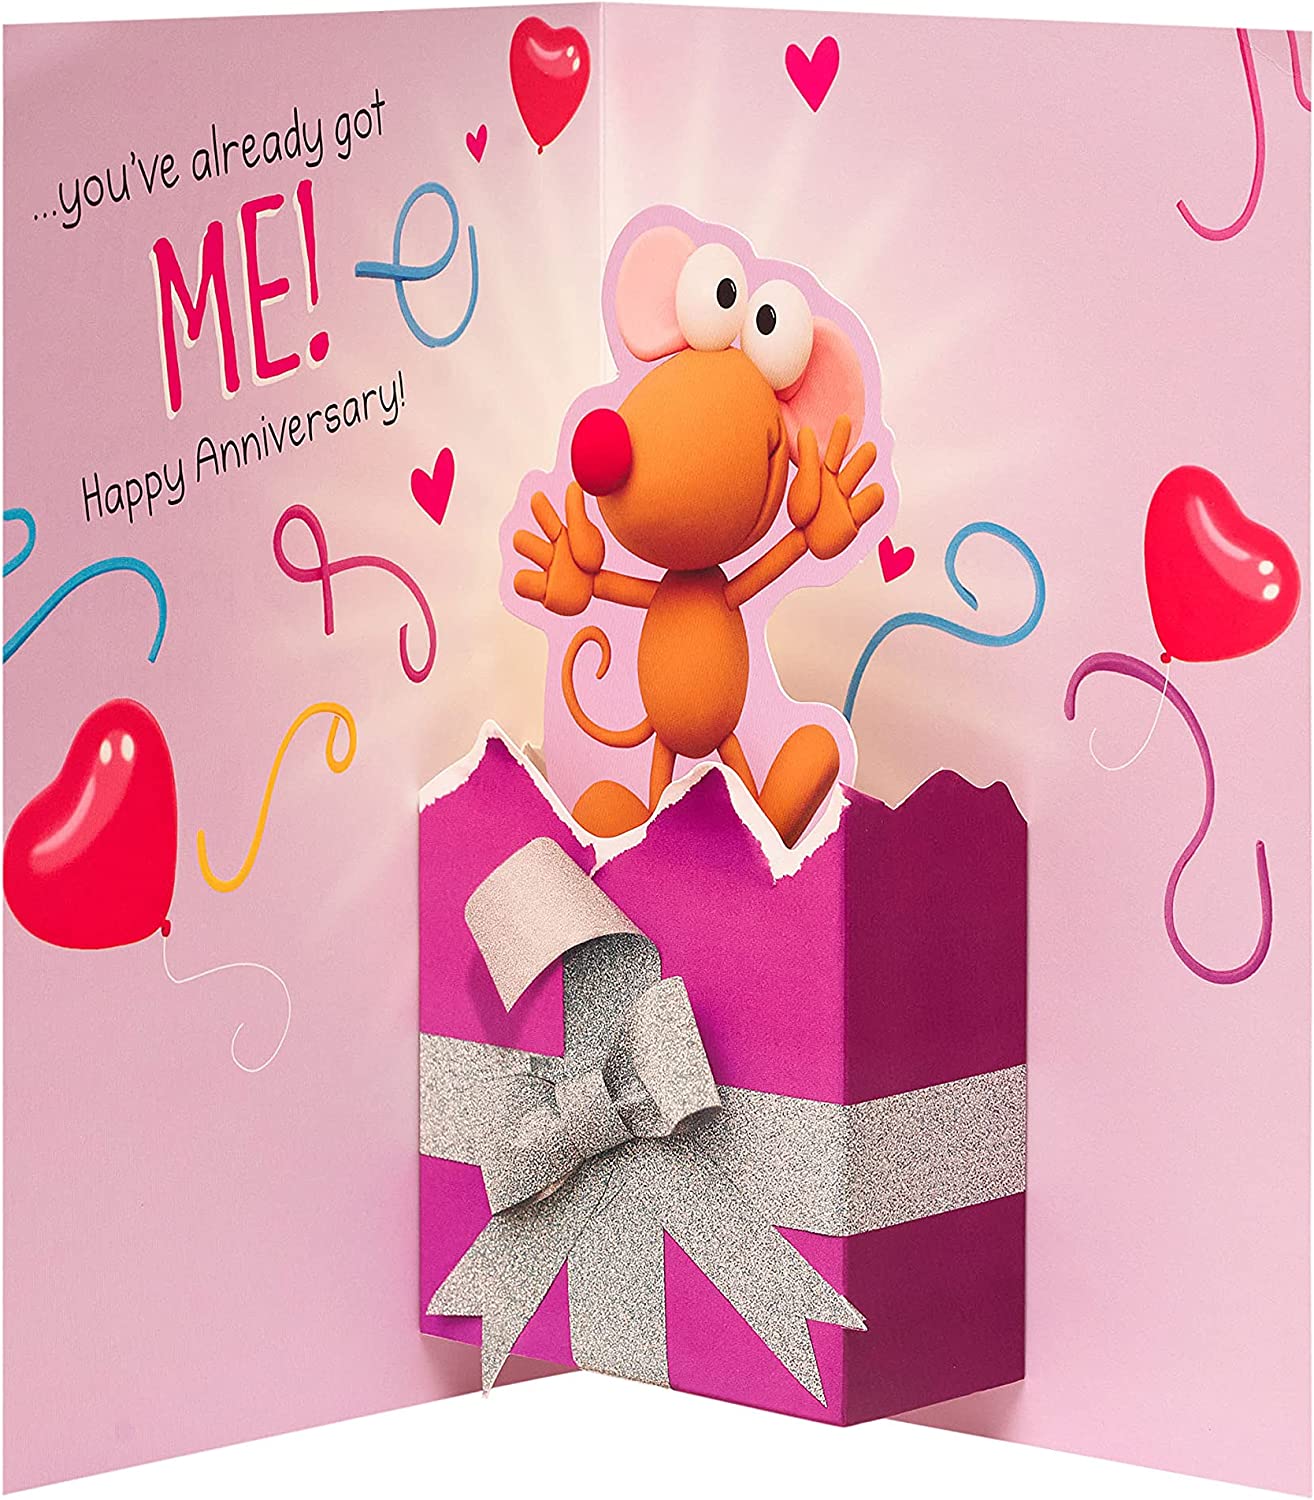 Pop Out Our Anniversary Humorous Card - When You Have Got Me